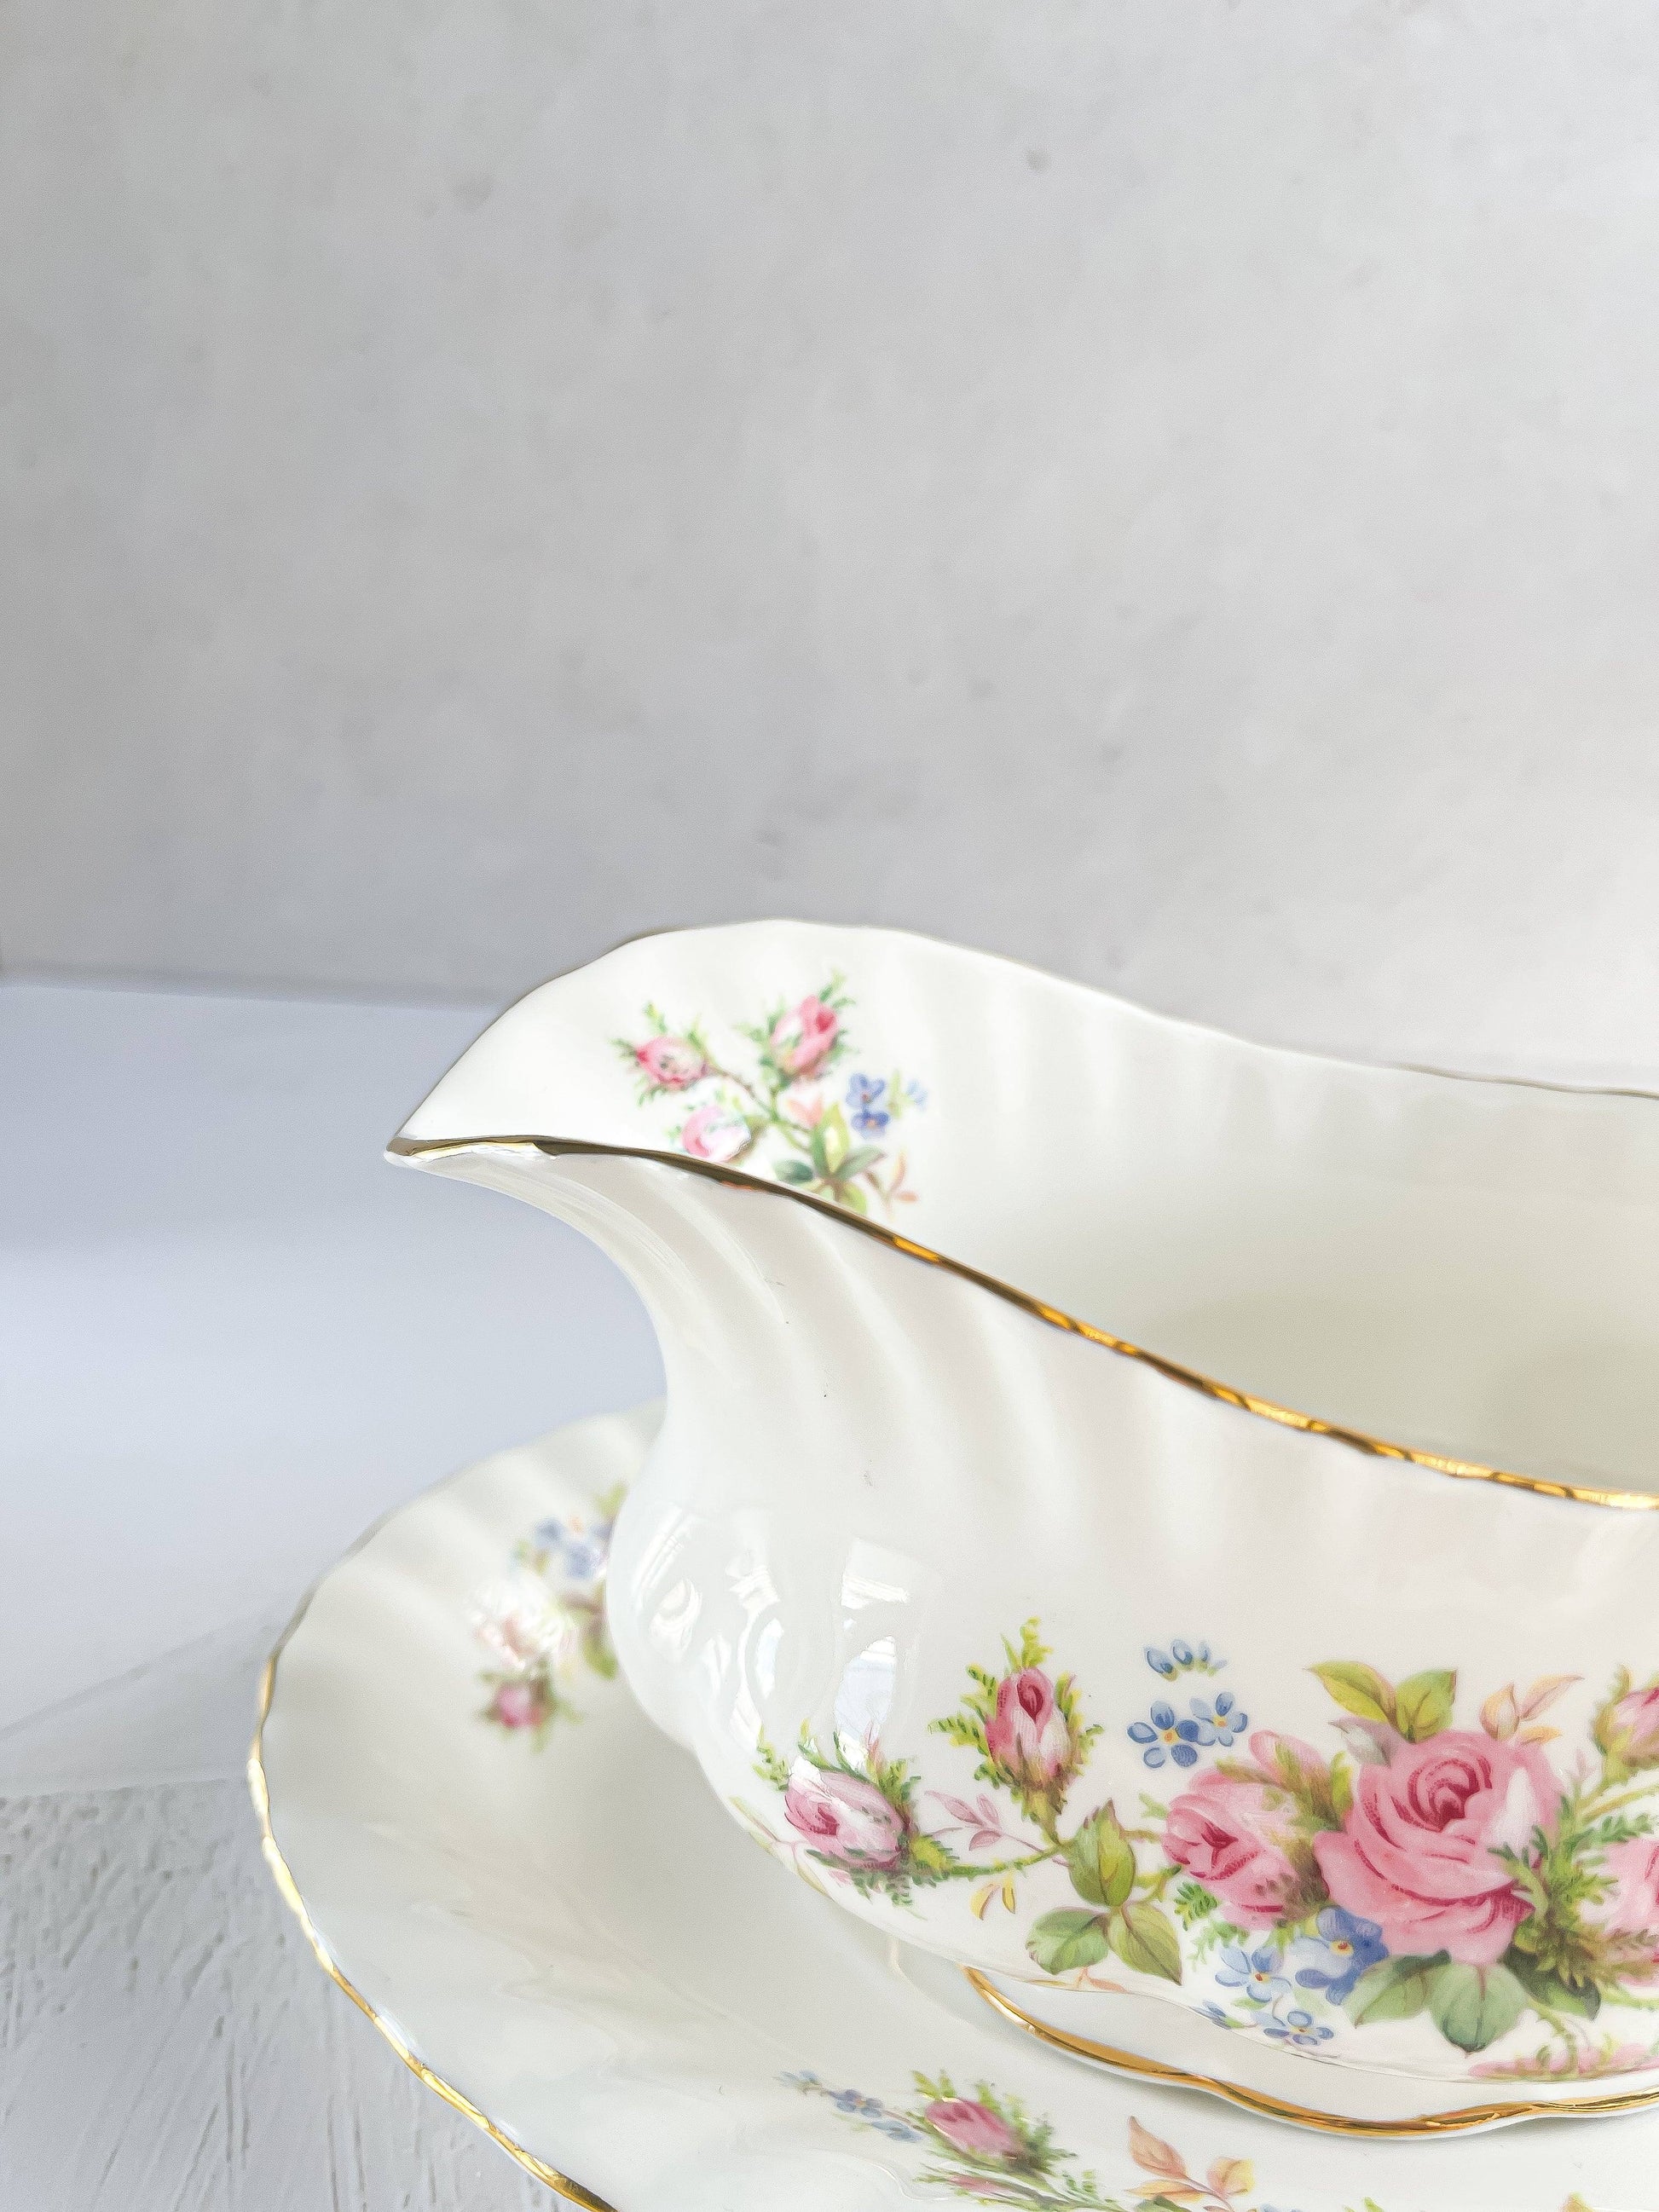 Royal Albert Gravy Boat & Underplate - 'Moss Rose' Collection - SOSC Home